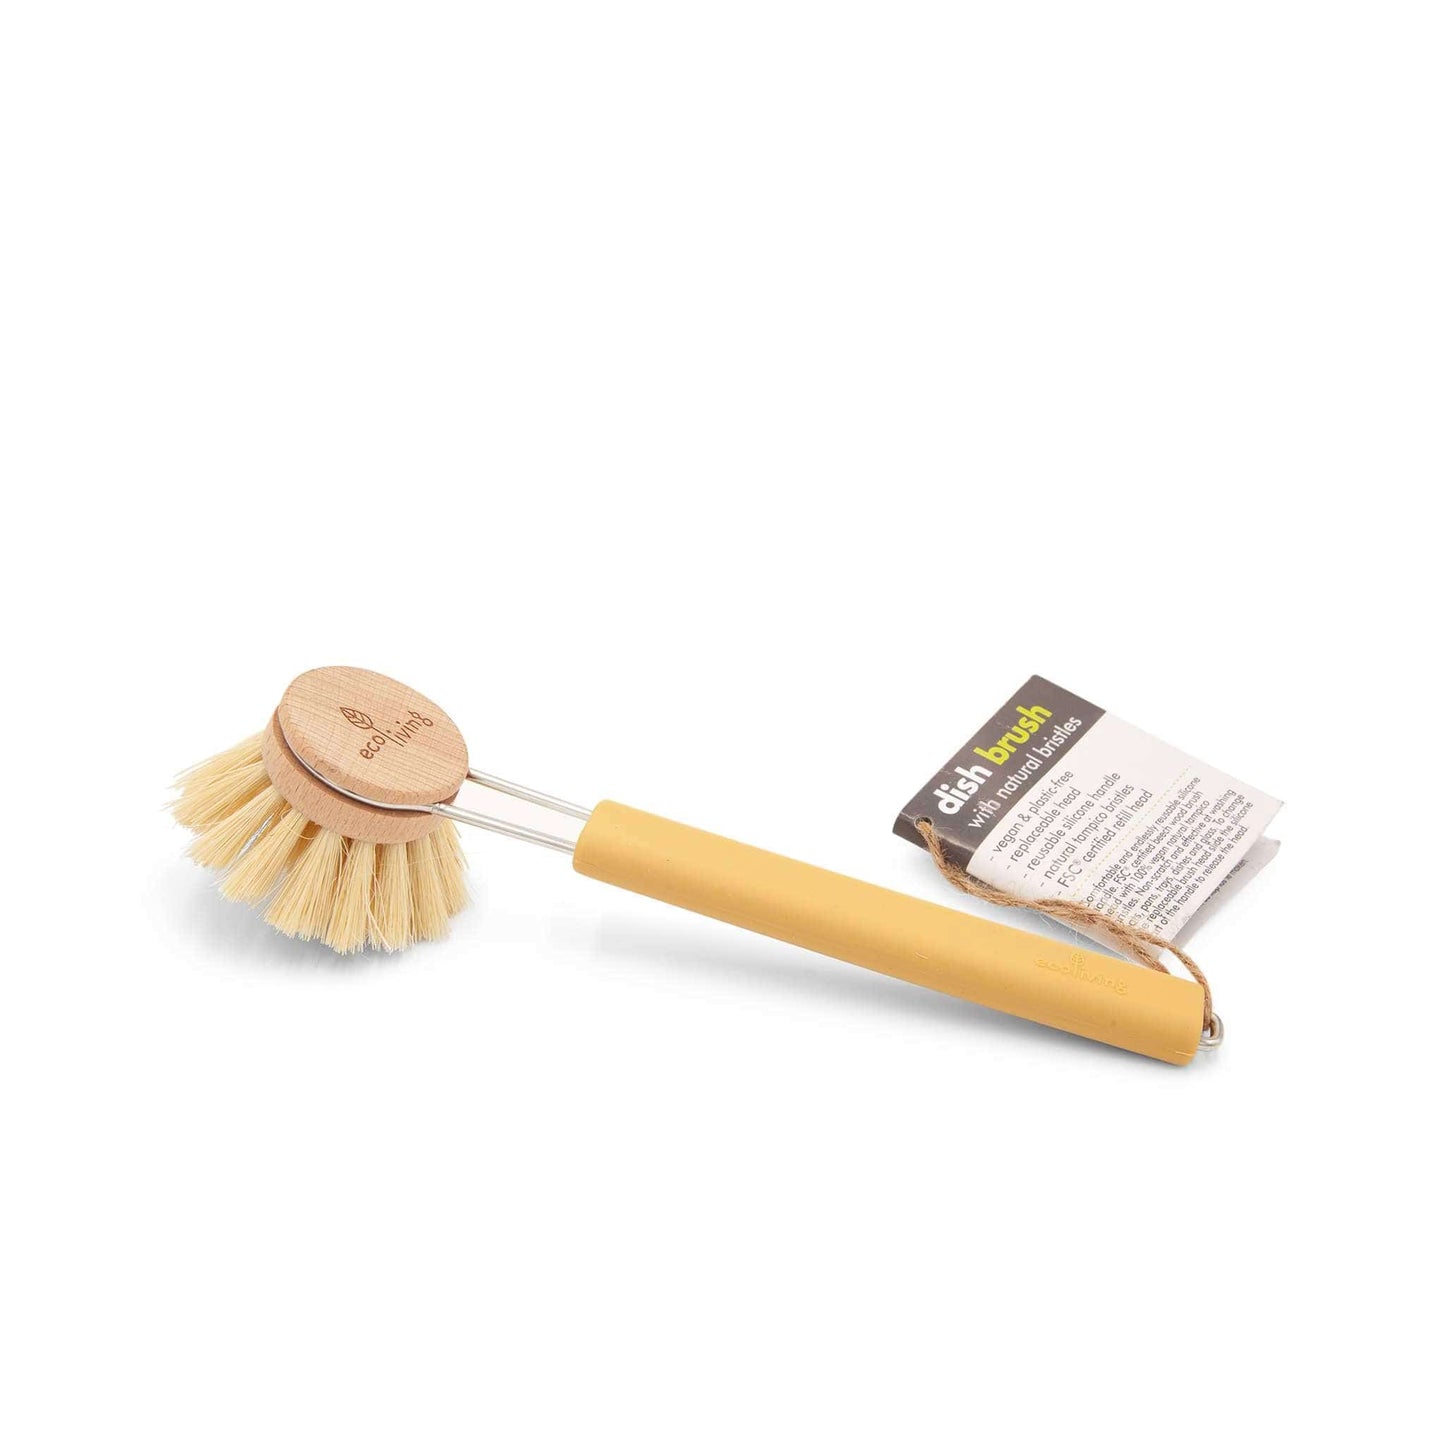 ecoLiving Brushes Saffron Yellow Dish Brush with Replaceable Head - Natural Plant Bristles (FSC 100%)